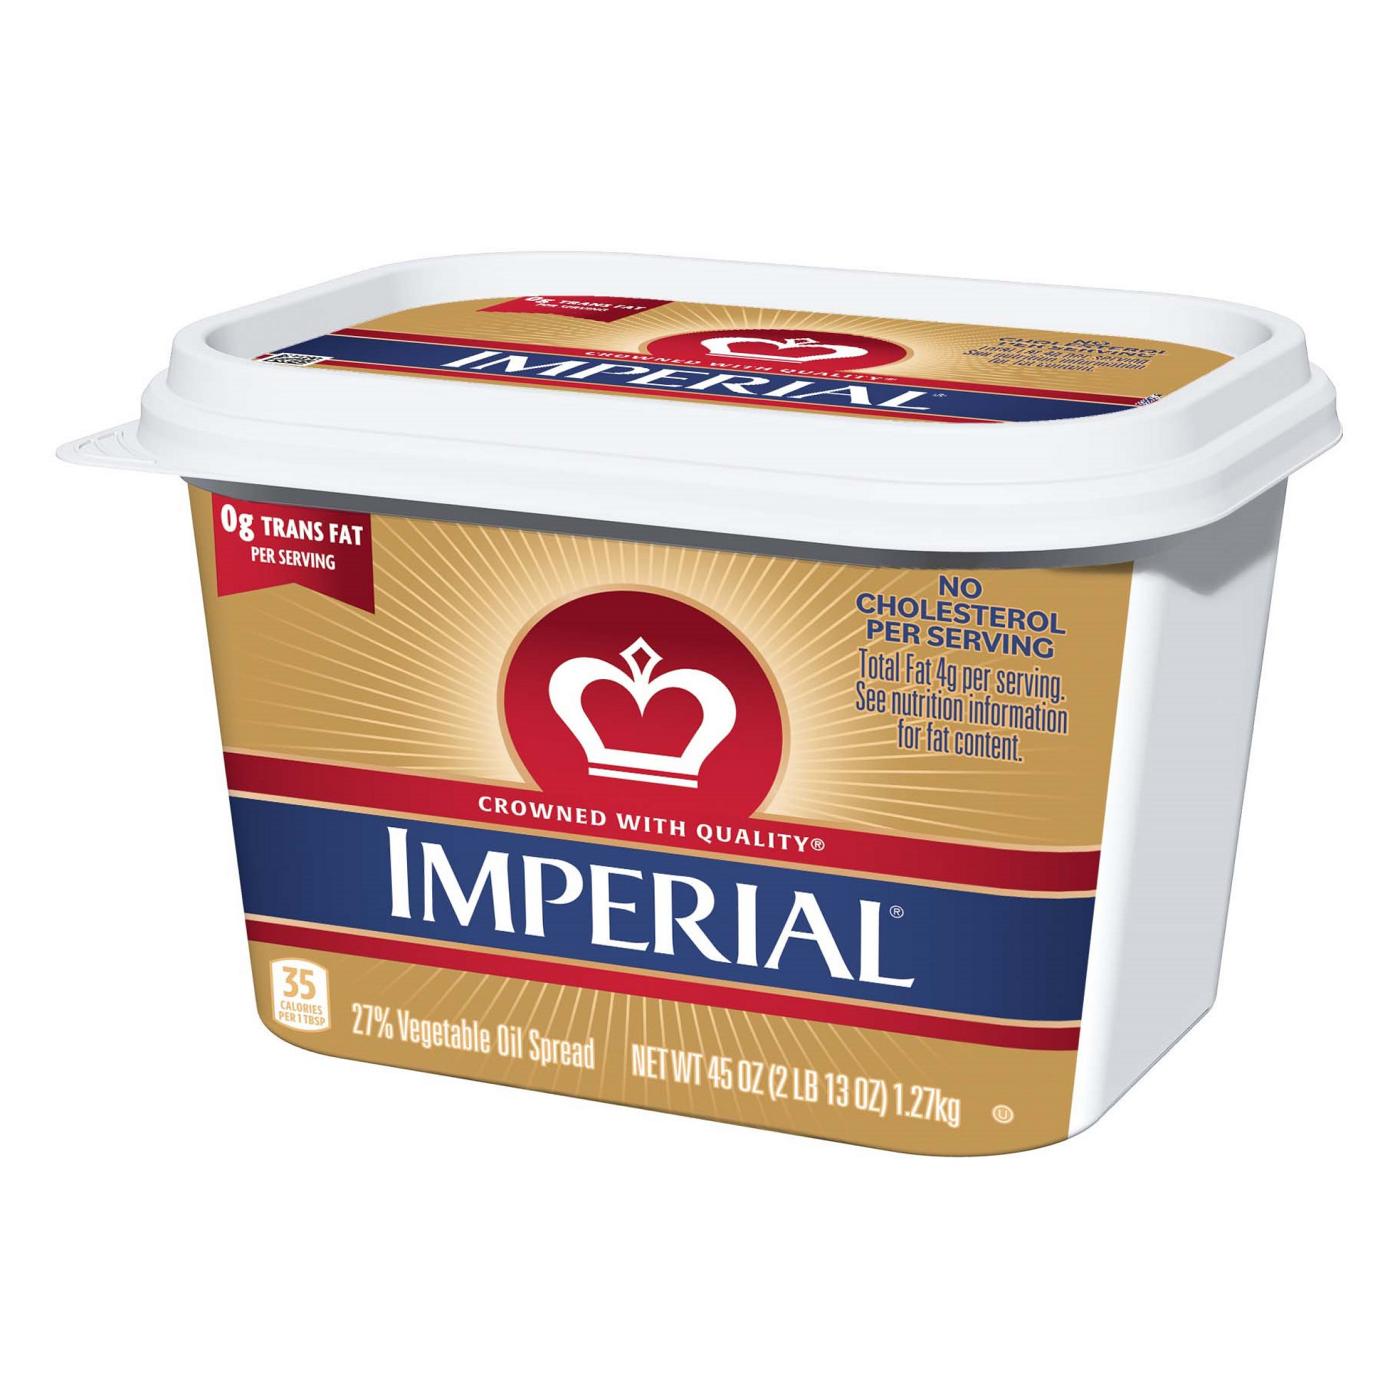 Imperial Vegetable Oil Spread; image 4 of 6